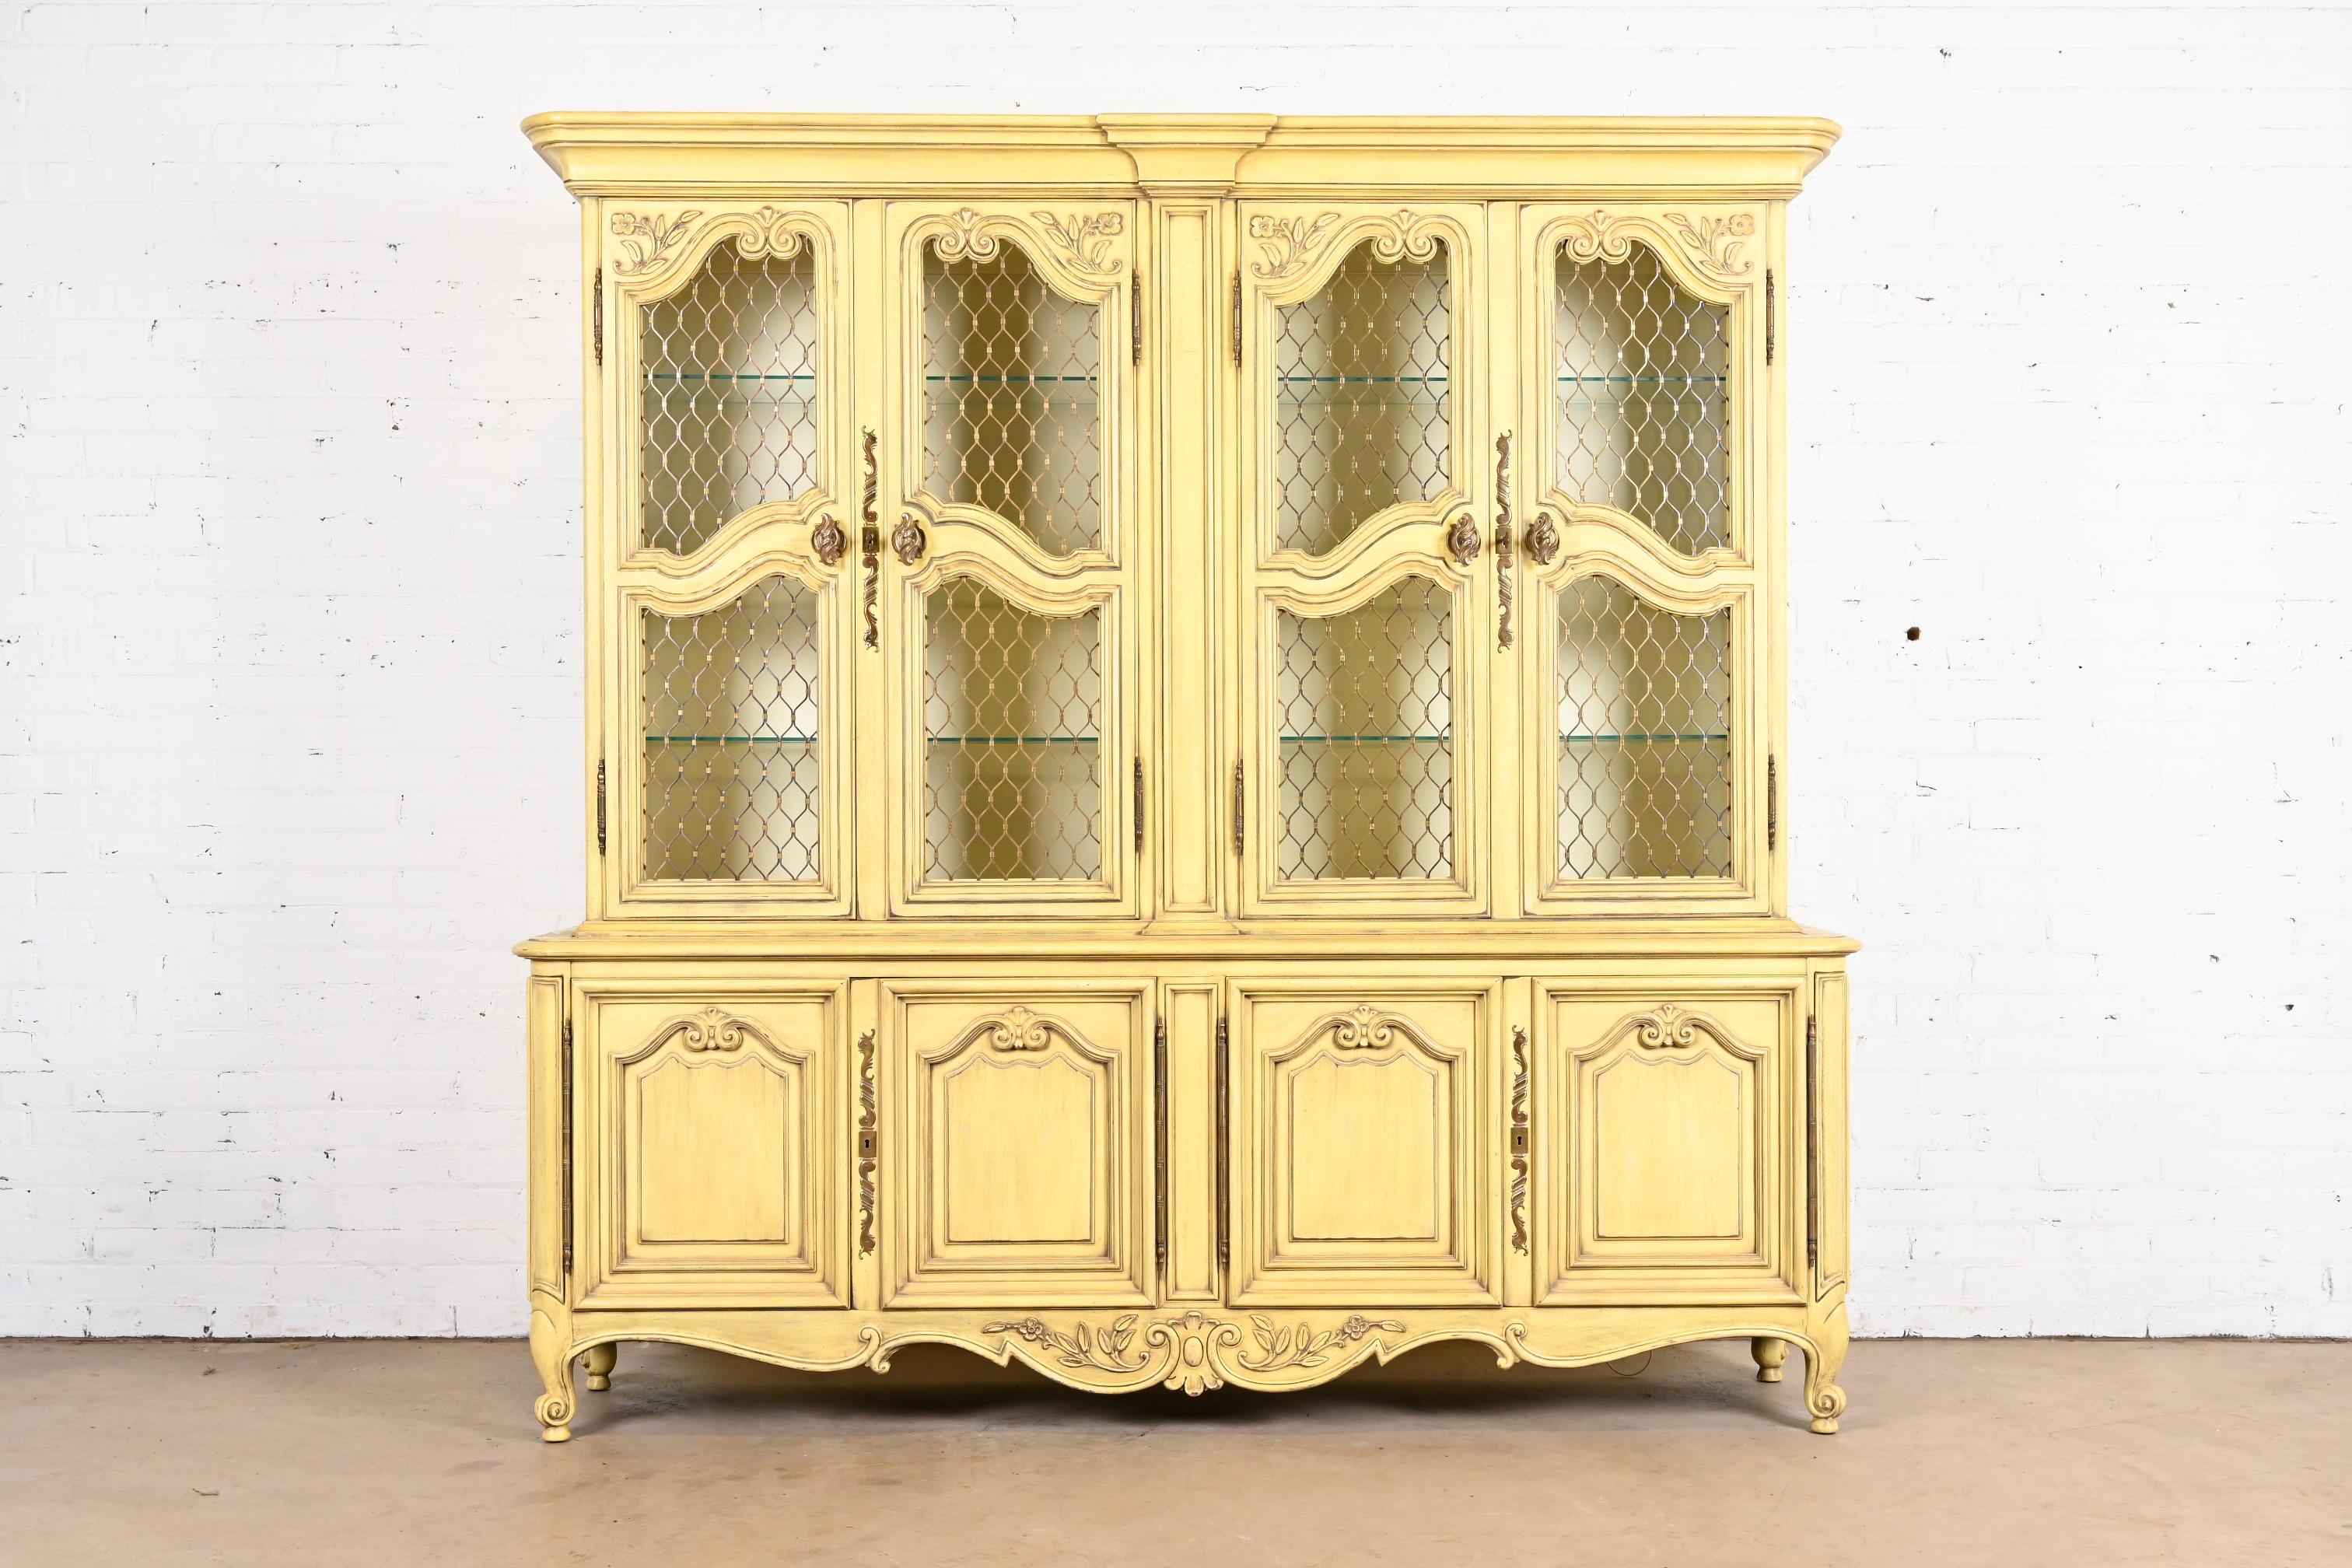 A beautiful French Provincial Louis XV style lighted breakfront bookcase or dining cabinet

By Karges

USA, Circa 1960s

Carved cream lacquered walnut, with original brass hardware. Cabinet locks, and key is included.

Measures: 80.25